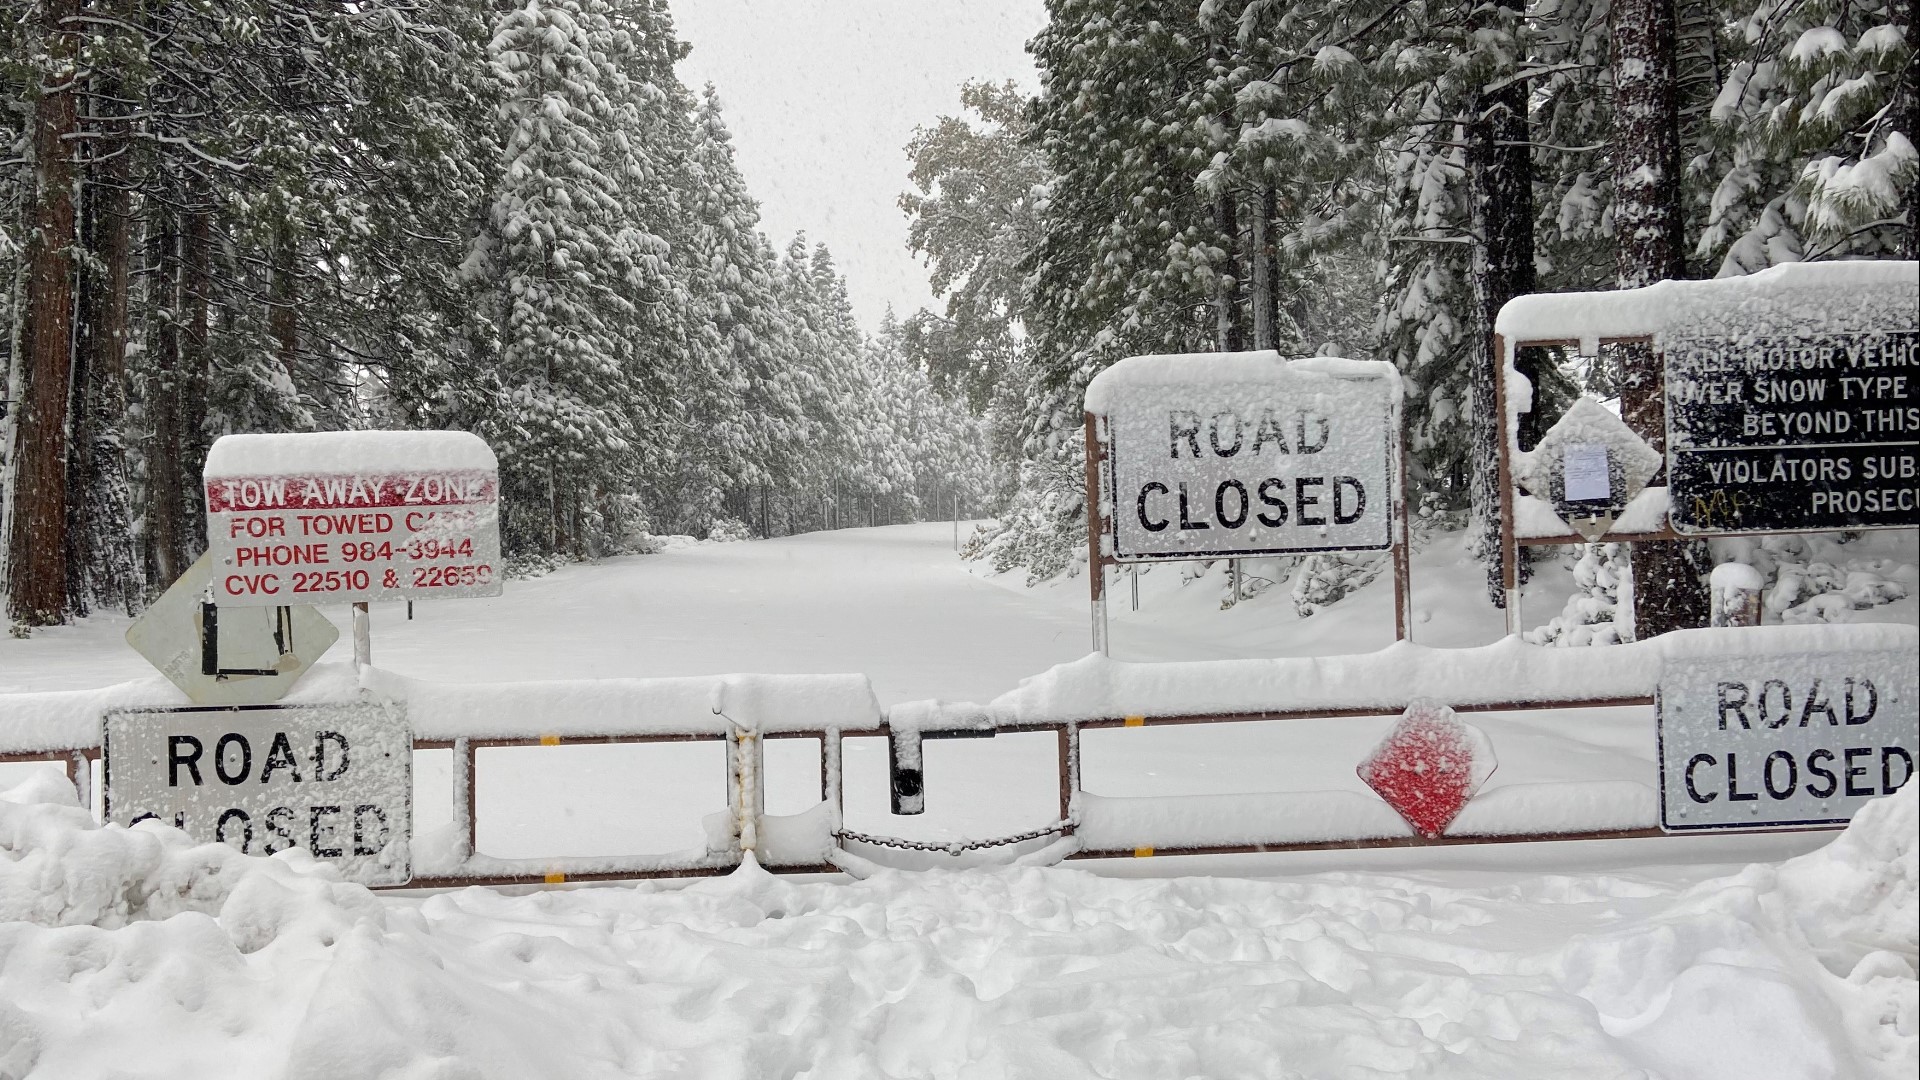 Expect inches of rain and multiple feet of snow as another storm prepares to hit Northern California